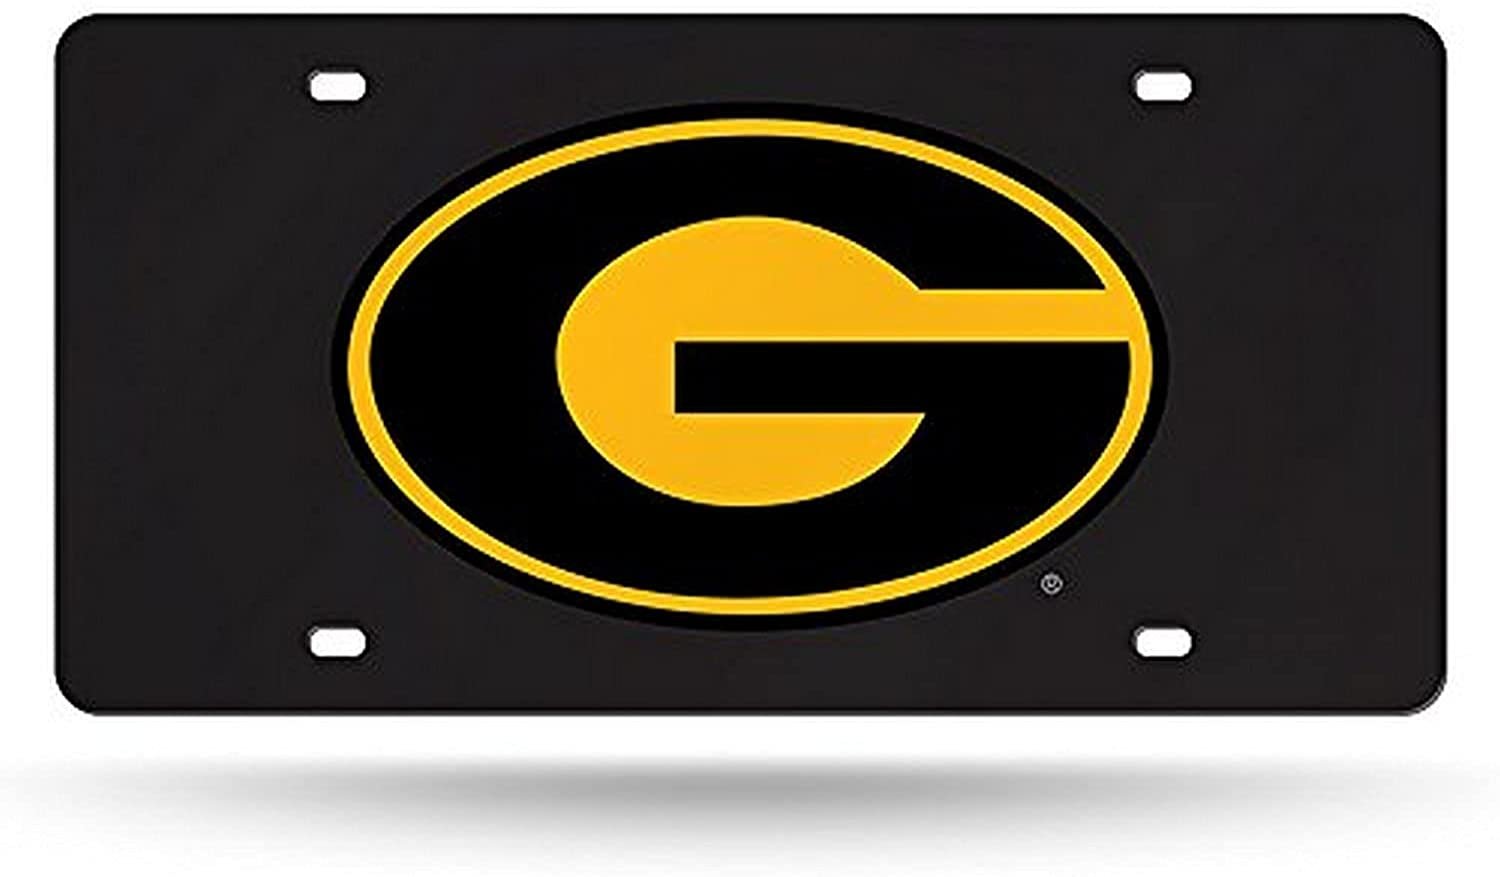 Grambling State University Tigers Premium Laser Cut Tag License Plate, Black, Mirrored Inlaid Acrylic, 12x6 Inch